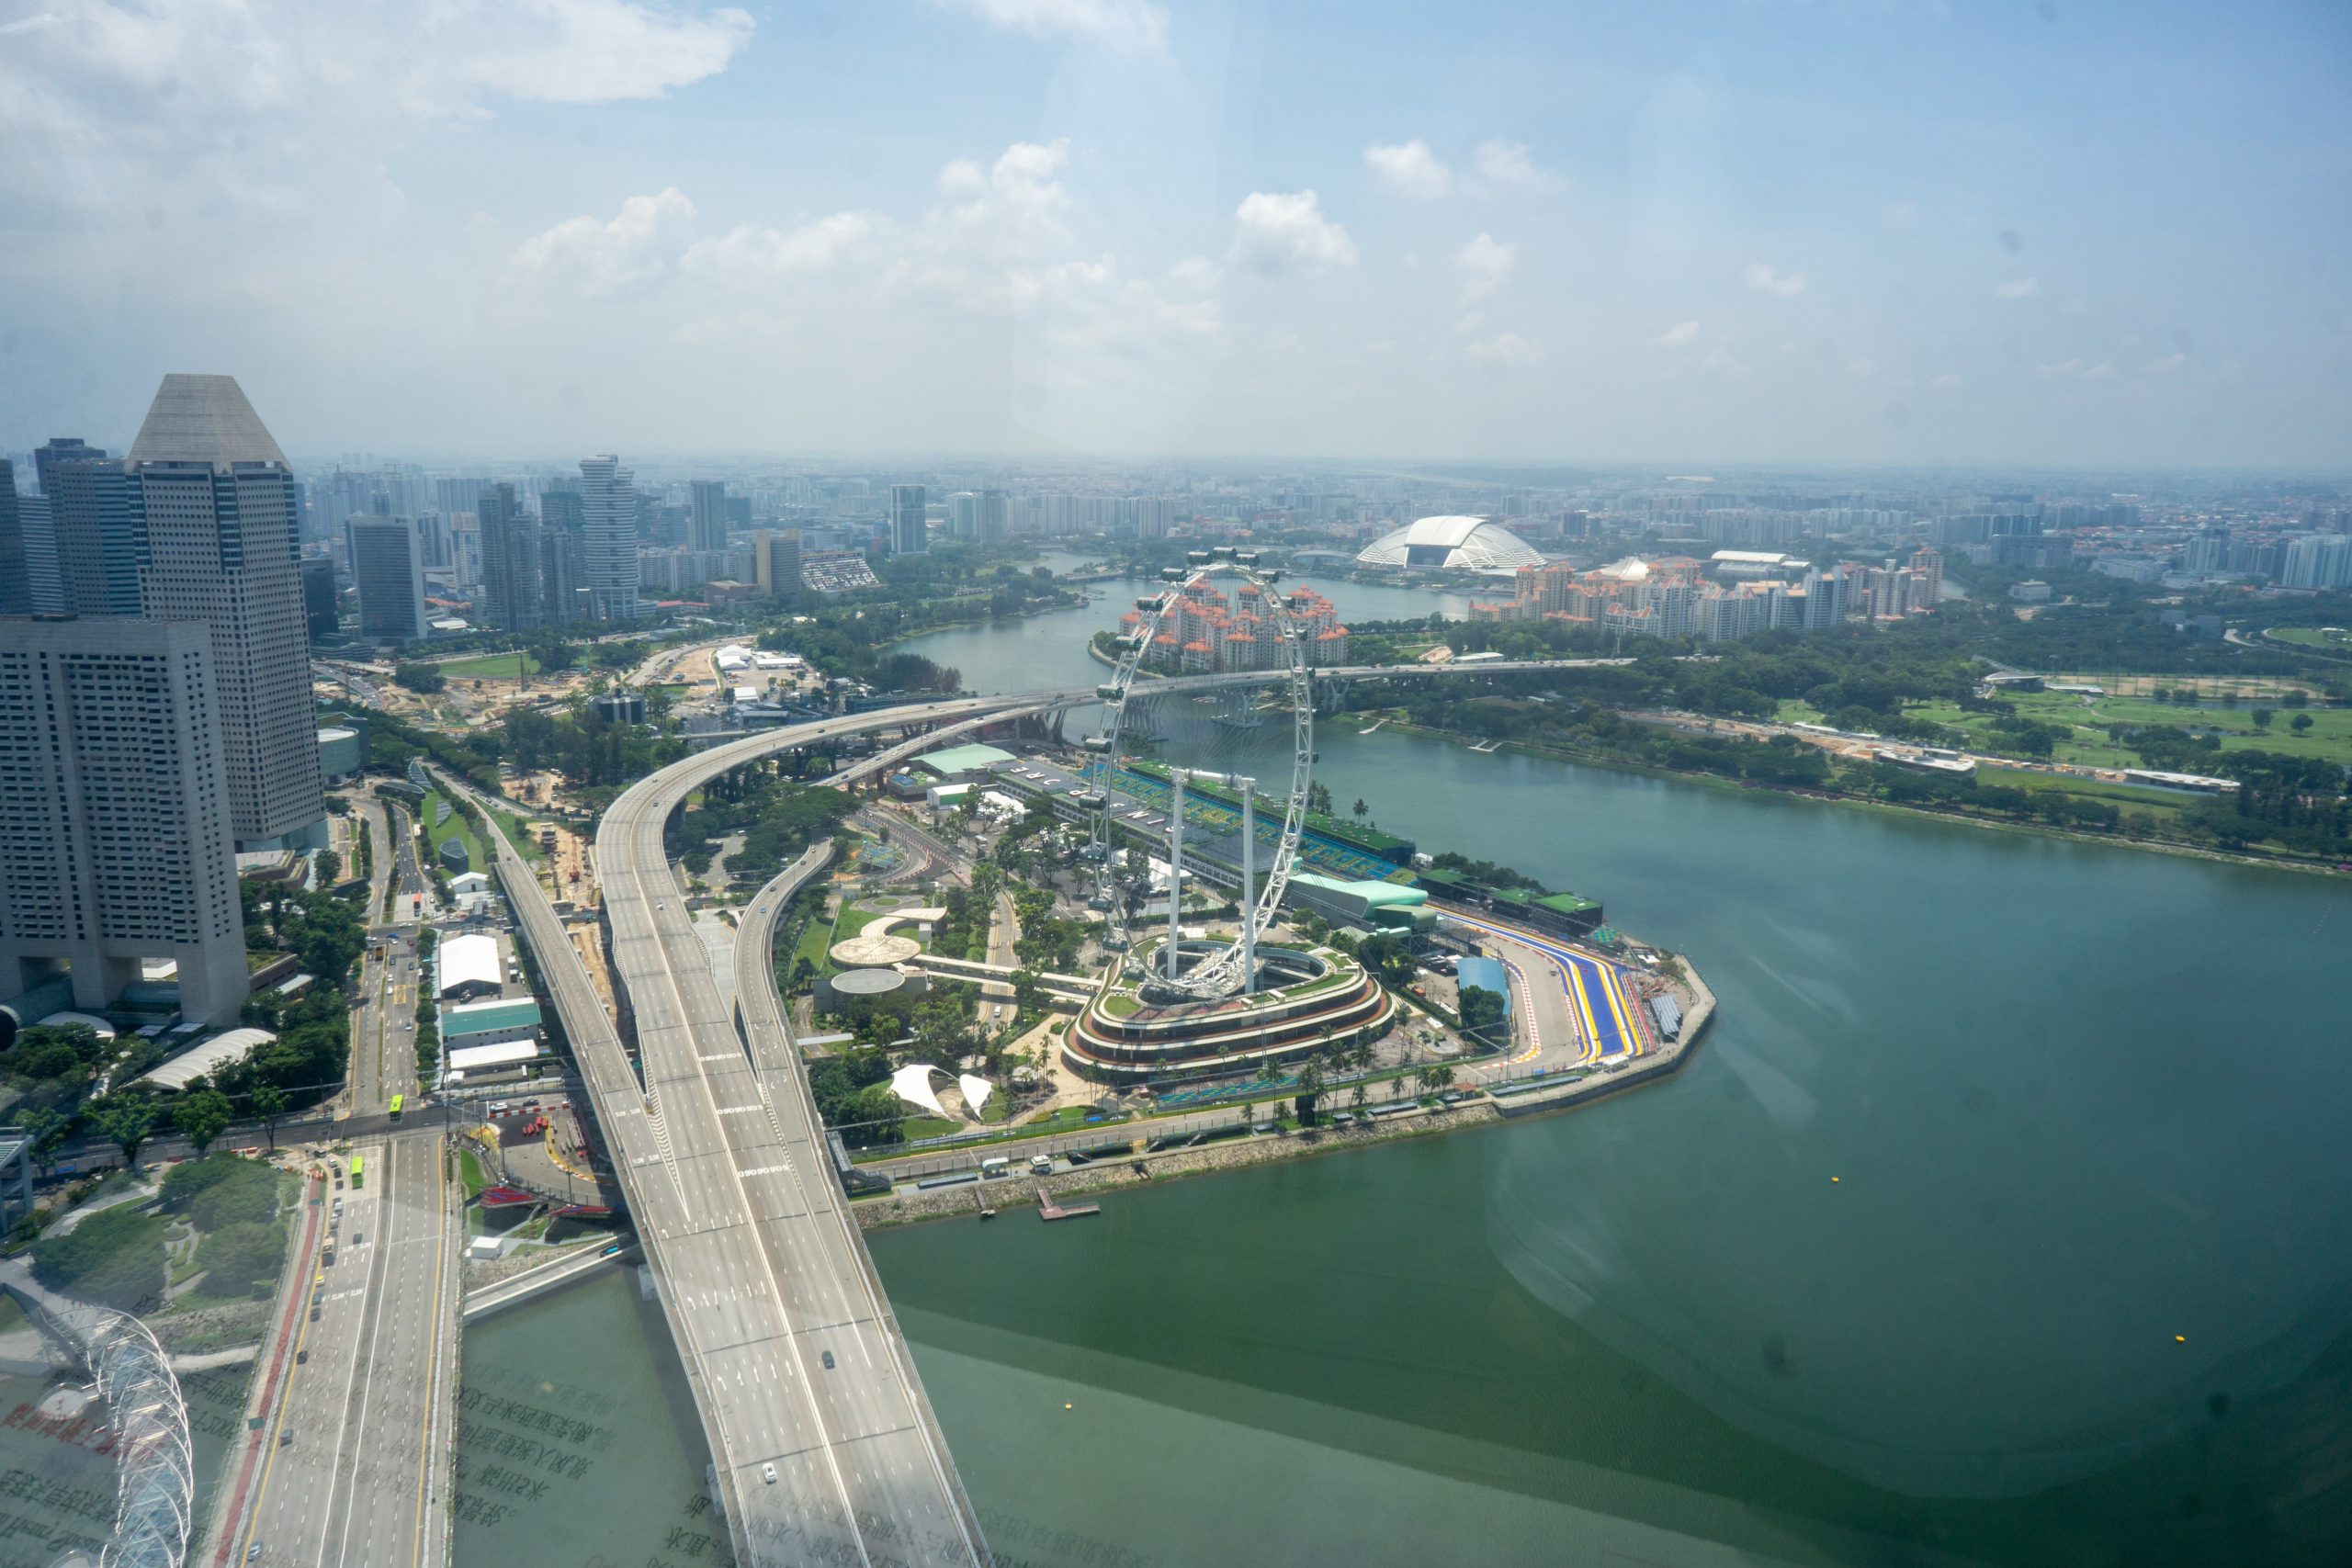 View from the Marina Bay Sands skydeck of the F1 track